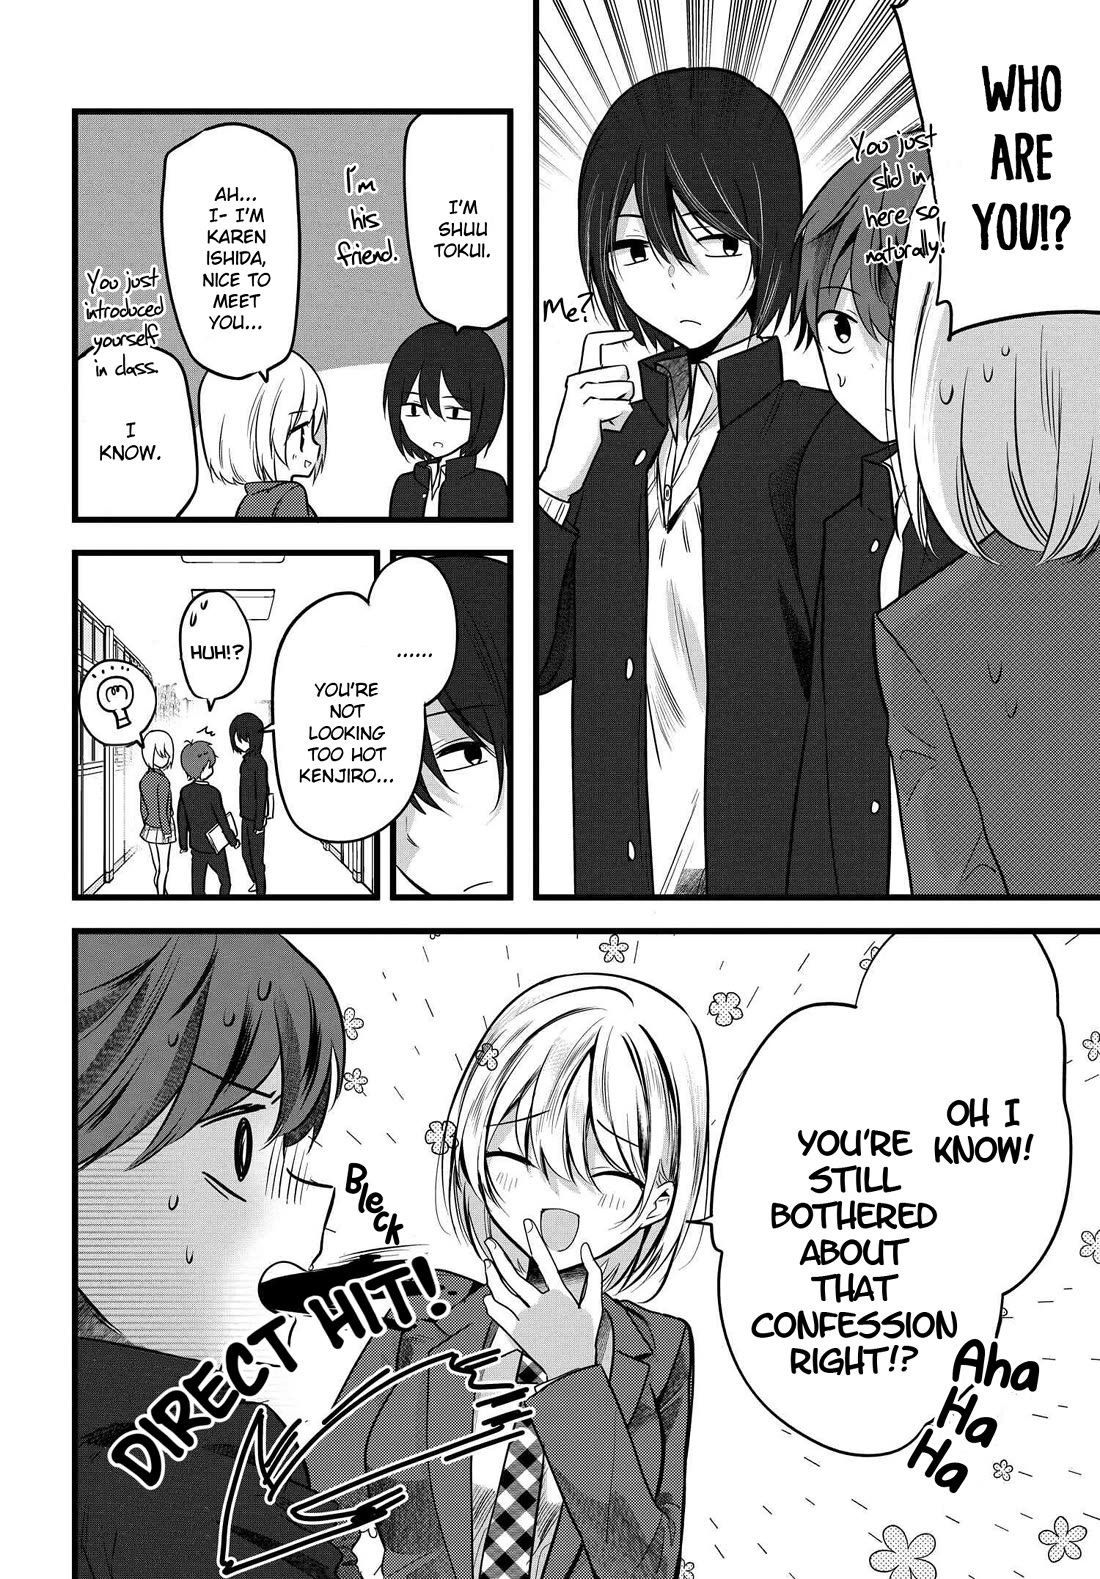 Tozaki-san Is Cold Only to Me - chapter 5 - #6